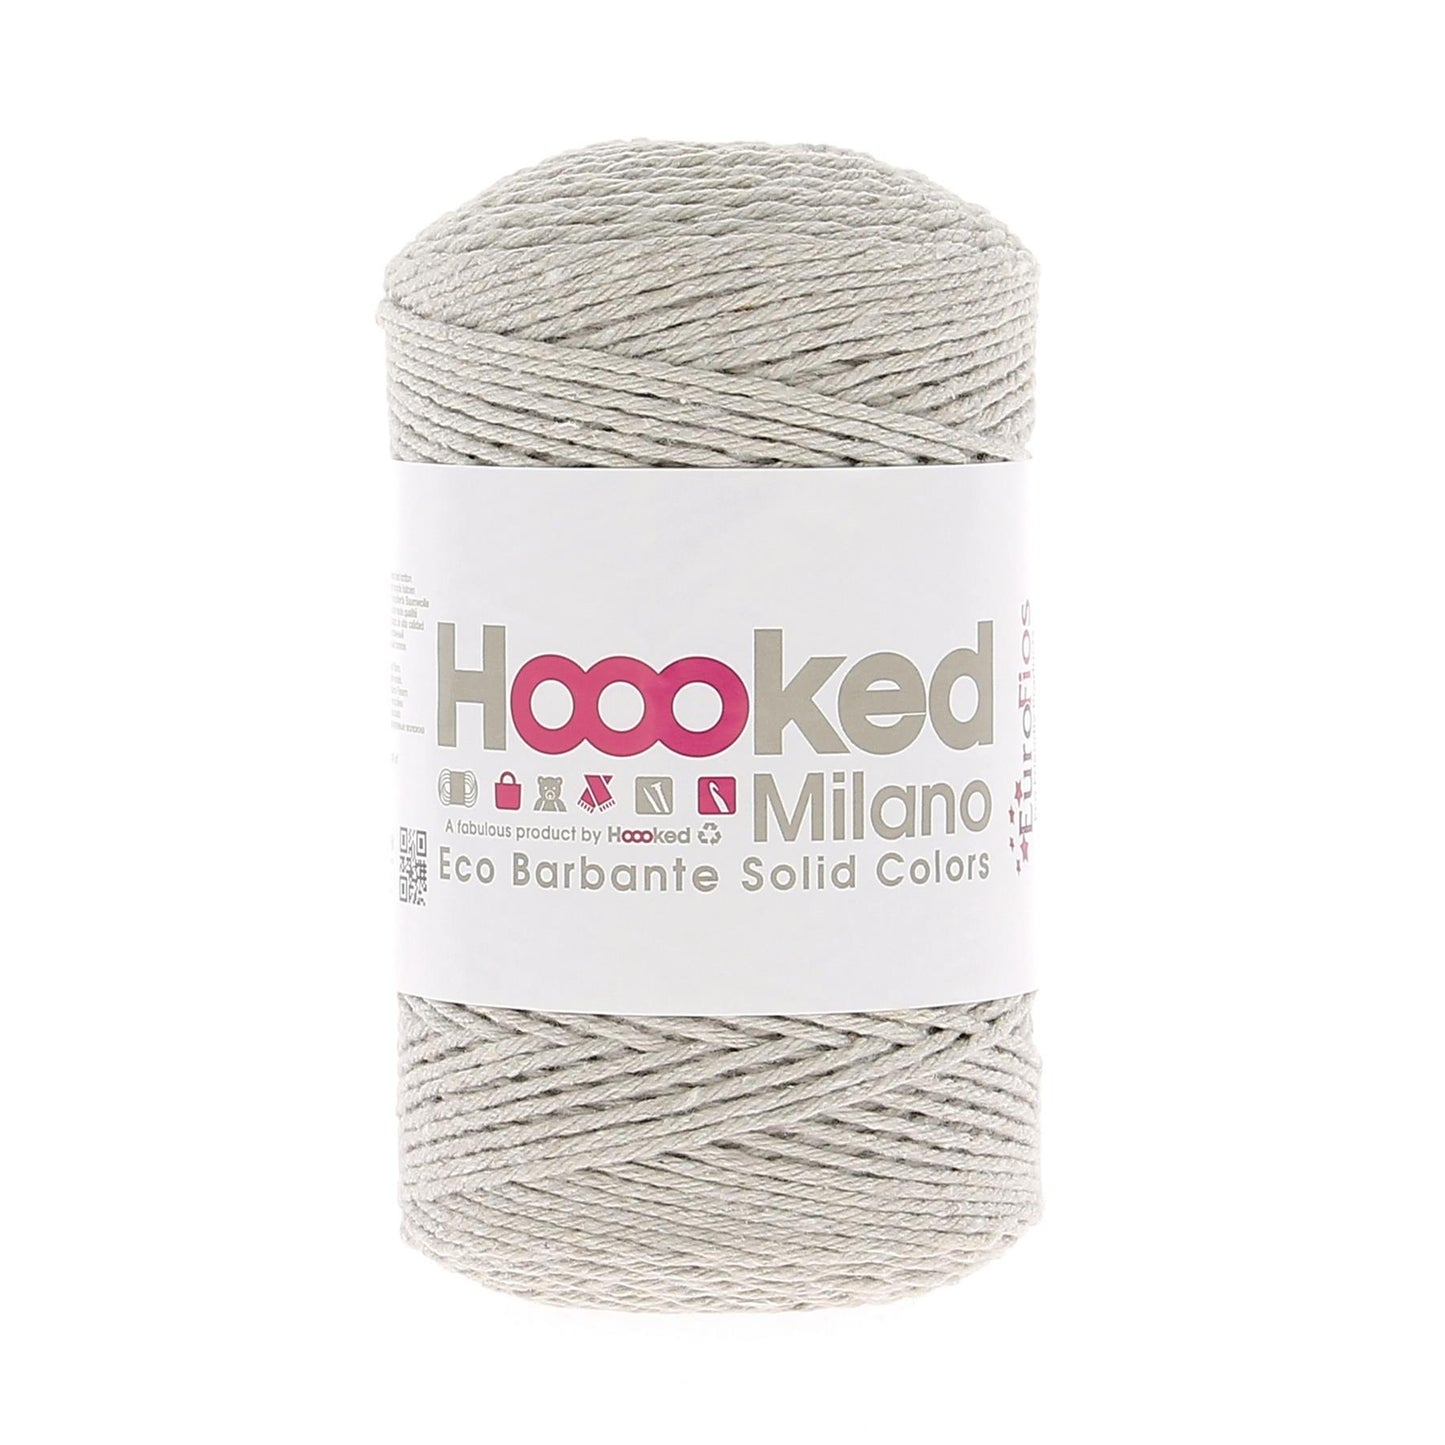 [Hoooked] R300 Eco Barbante Milano Biscuit Cotton Yarn - 204M, 200g